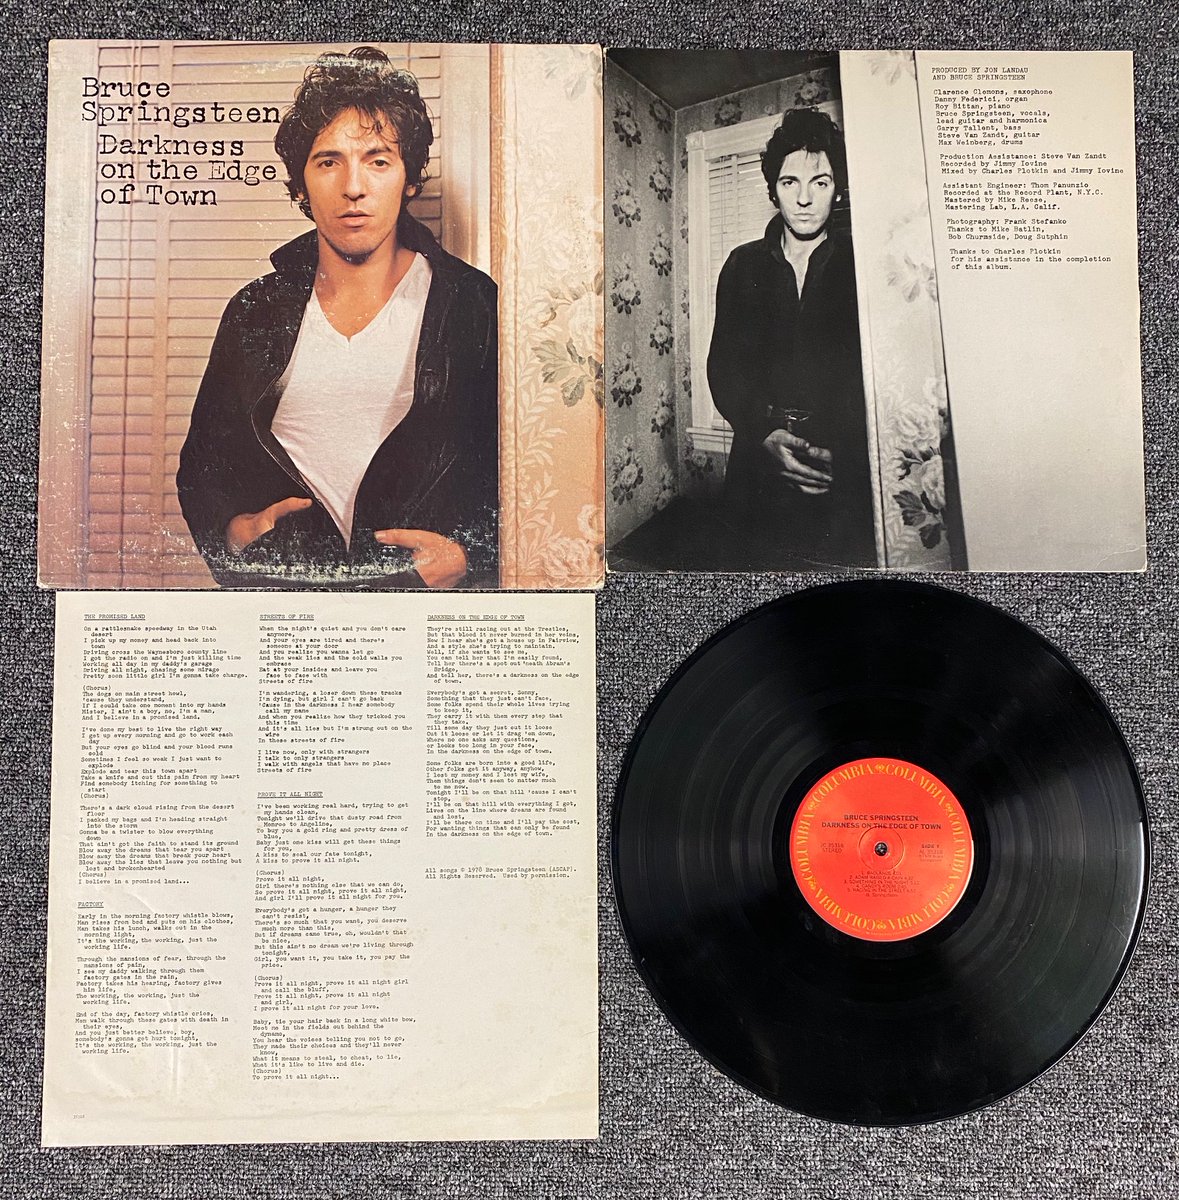 Today in 1978 Bruce @Springsteen releases his album #DarknessOnTheEdgeOfTown What was the first #Springsteen album you bought? #Rock #ClassicRock #BruceSpringsteen #BruceSpringsteenAndTheEStreetBand #Vinyl #RockOnRock #TodayInRock #ClassicRockParty #CRP